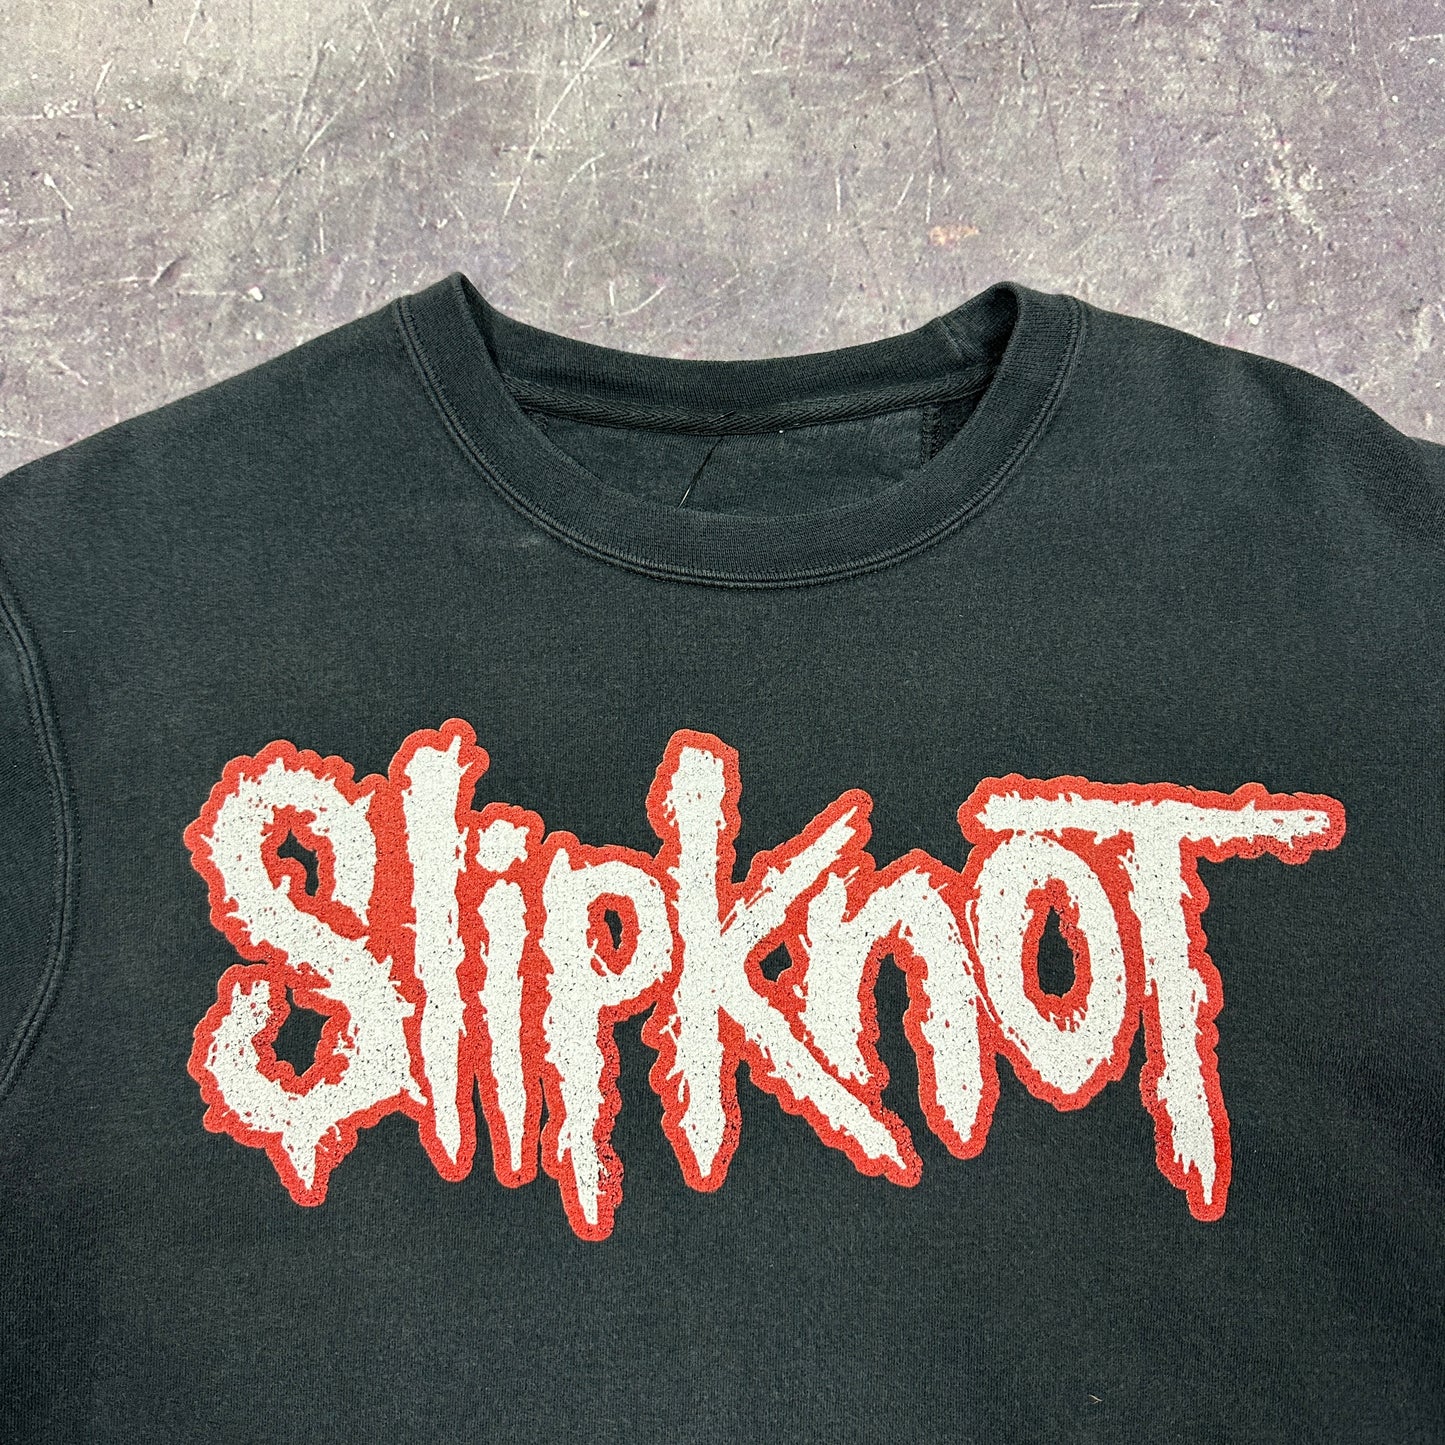 Early 00s Faded Black Slipknot Band Graphic Crewneck Sweasthirt AB39